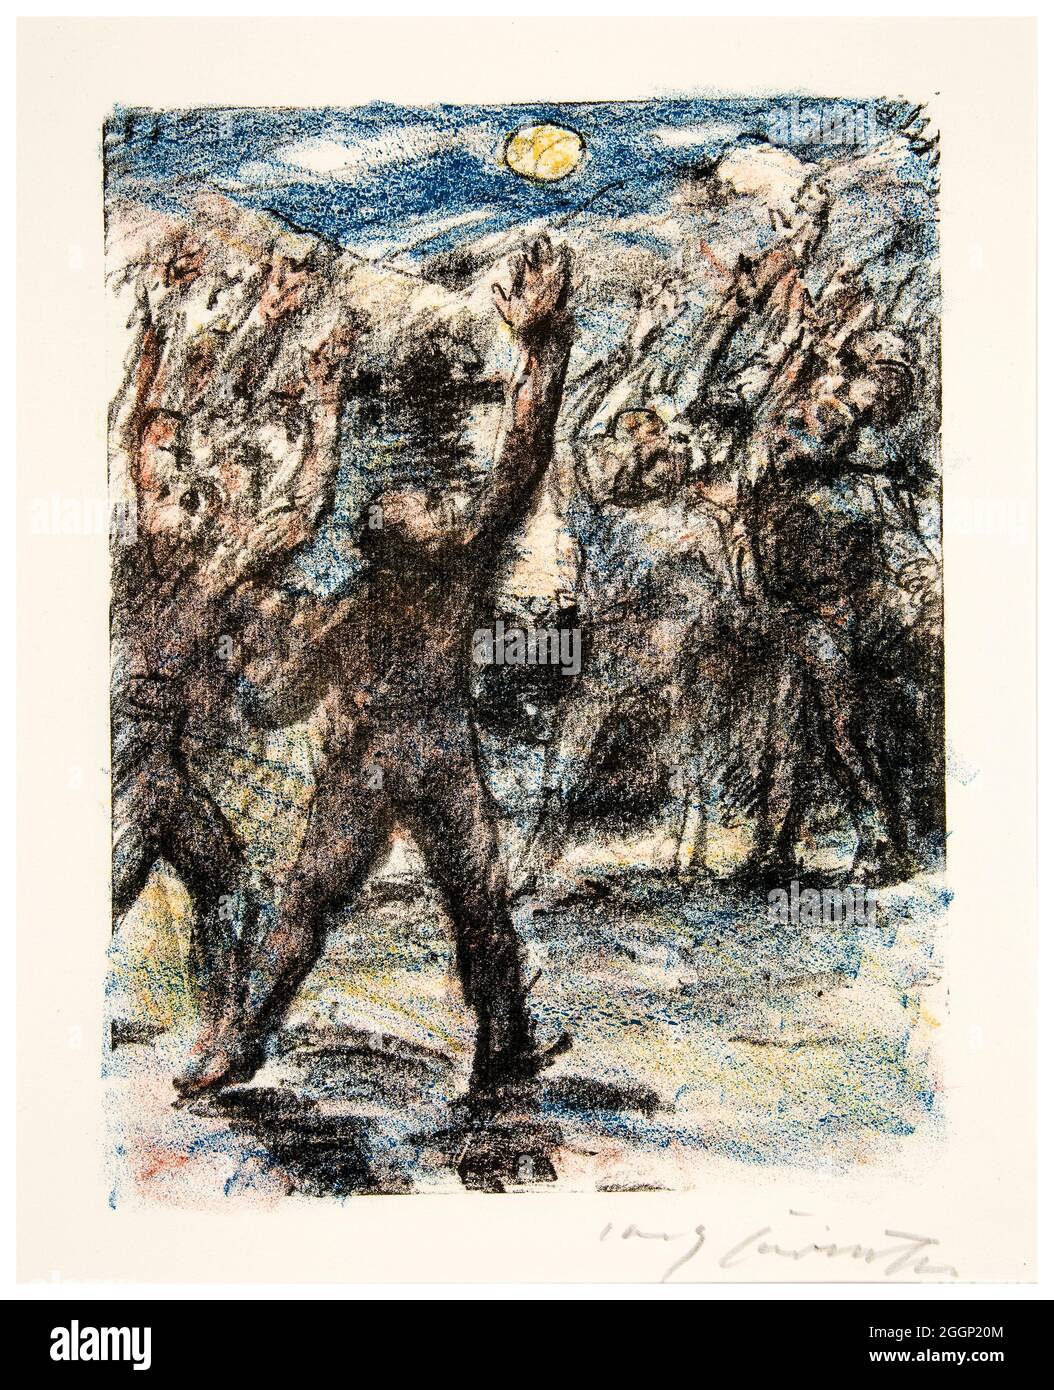 Lovis Corinth, William Tell, The Oath at the Rutli, impression lithographique, avant 1925 Banque D'Images